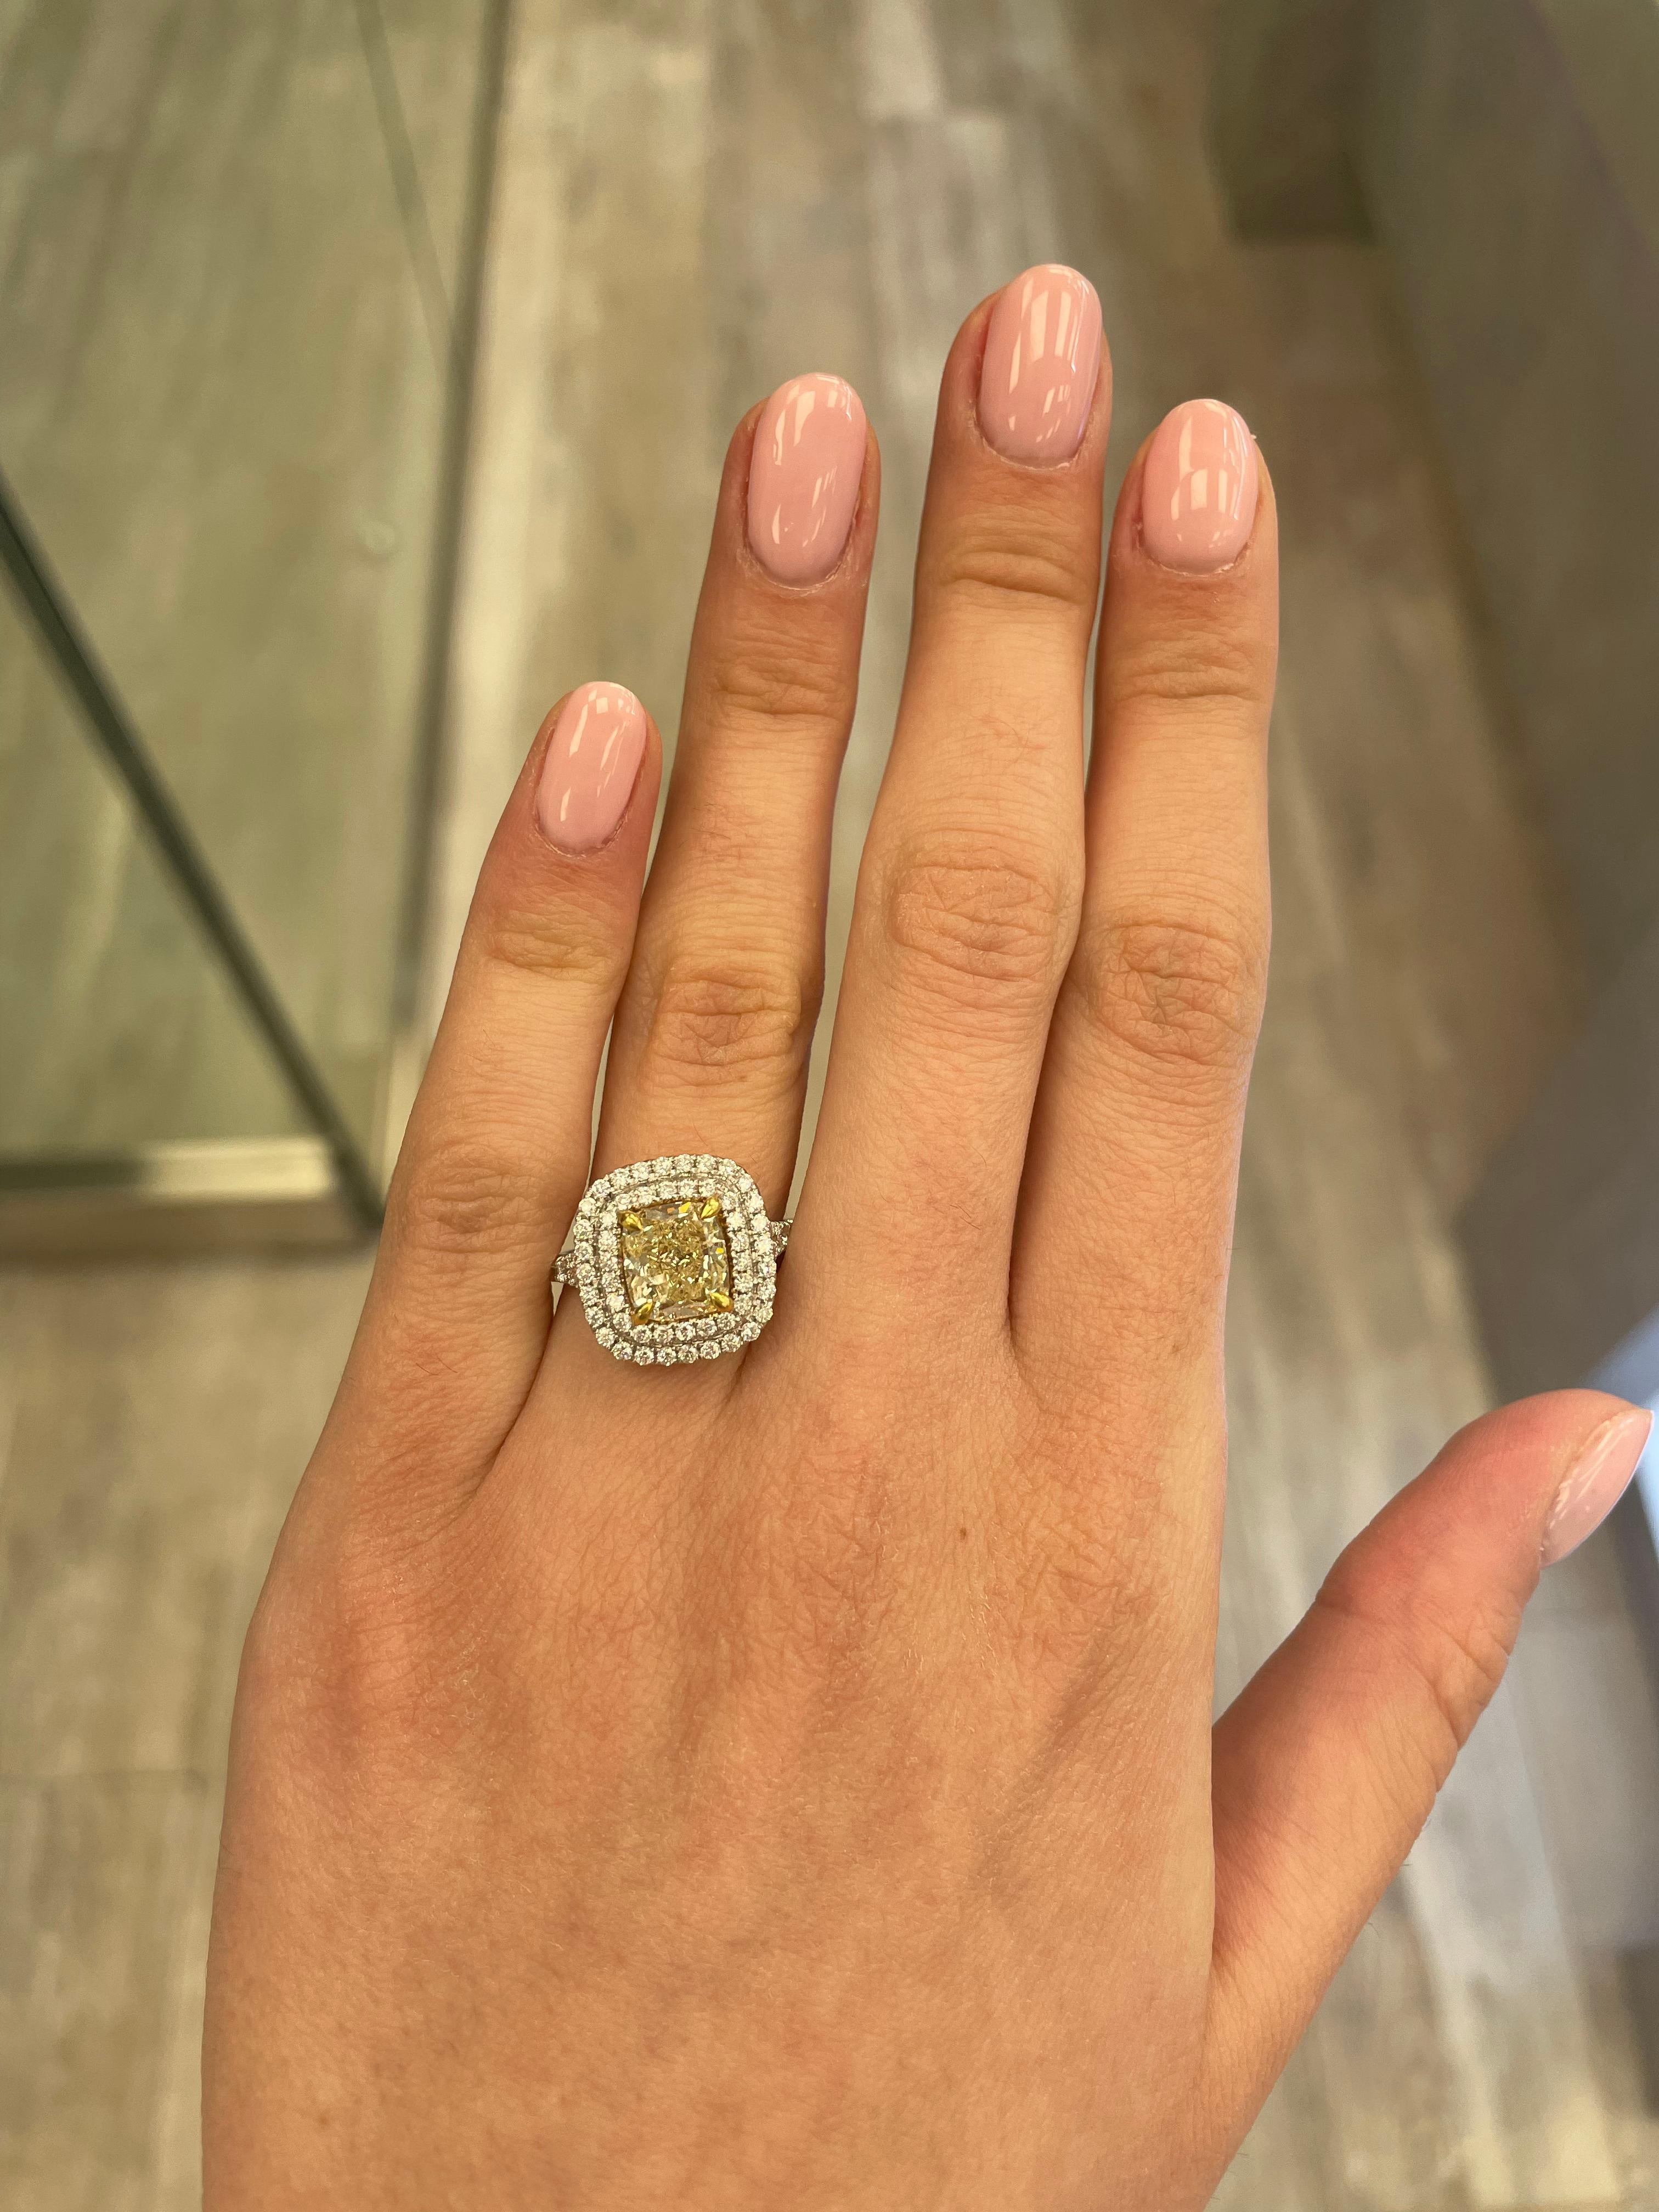 Stunning modern EGL certified yellow diamond double halo ring, two-tone 18k yellow and white gold. By Alexander Beverly Hills
3.33 carats total diamond weight.
2.51 carat cushion cut Fancy Yellow color and SI3 clarity diamond, EGL graded in the